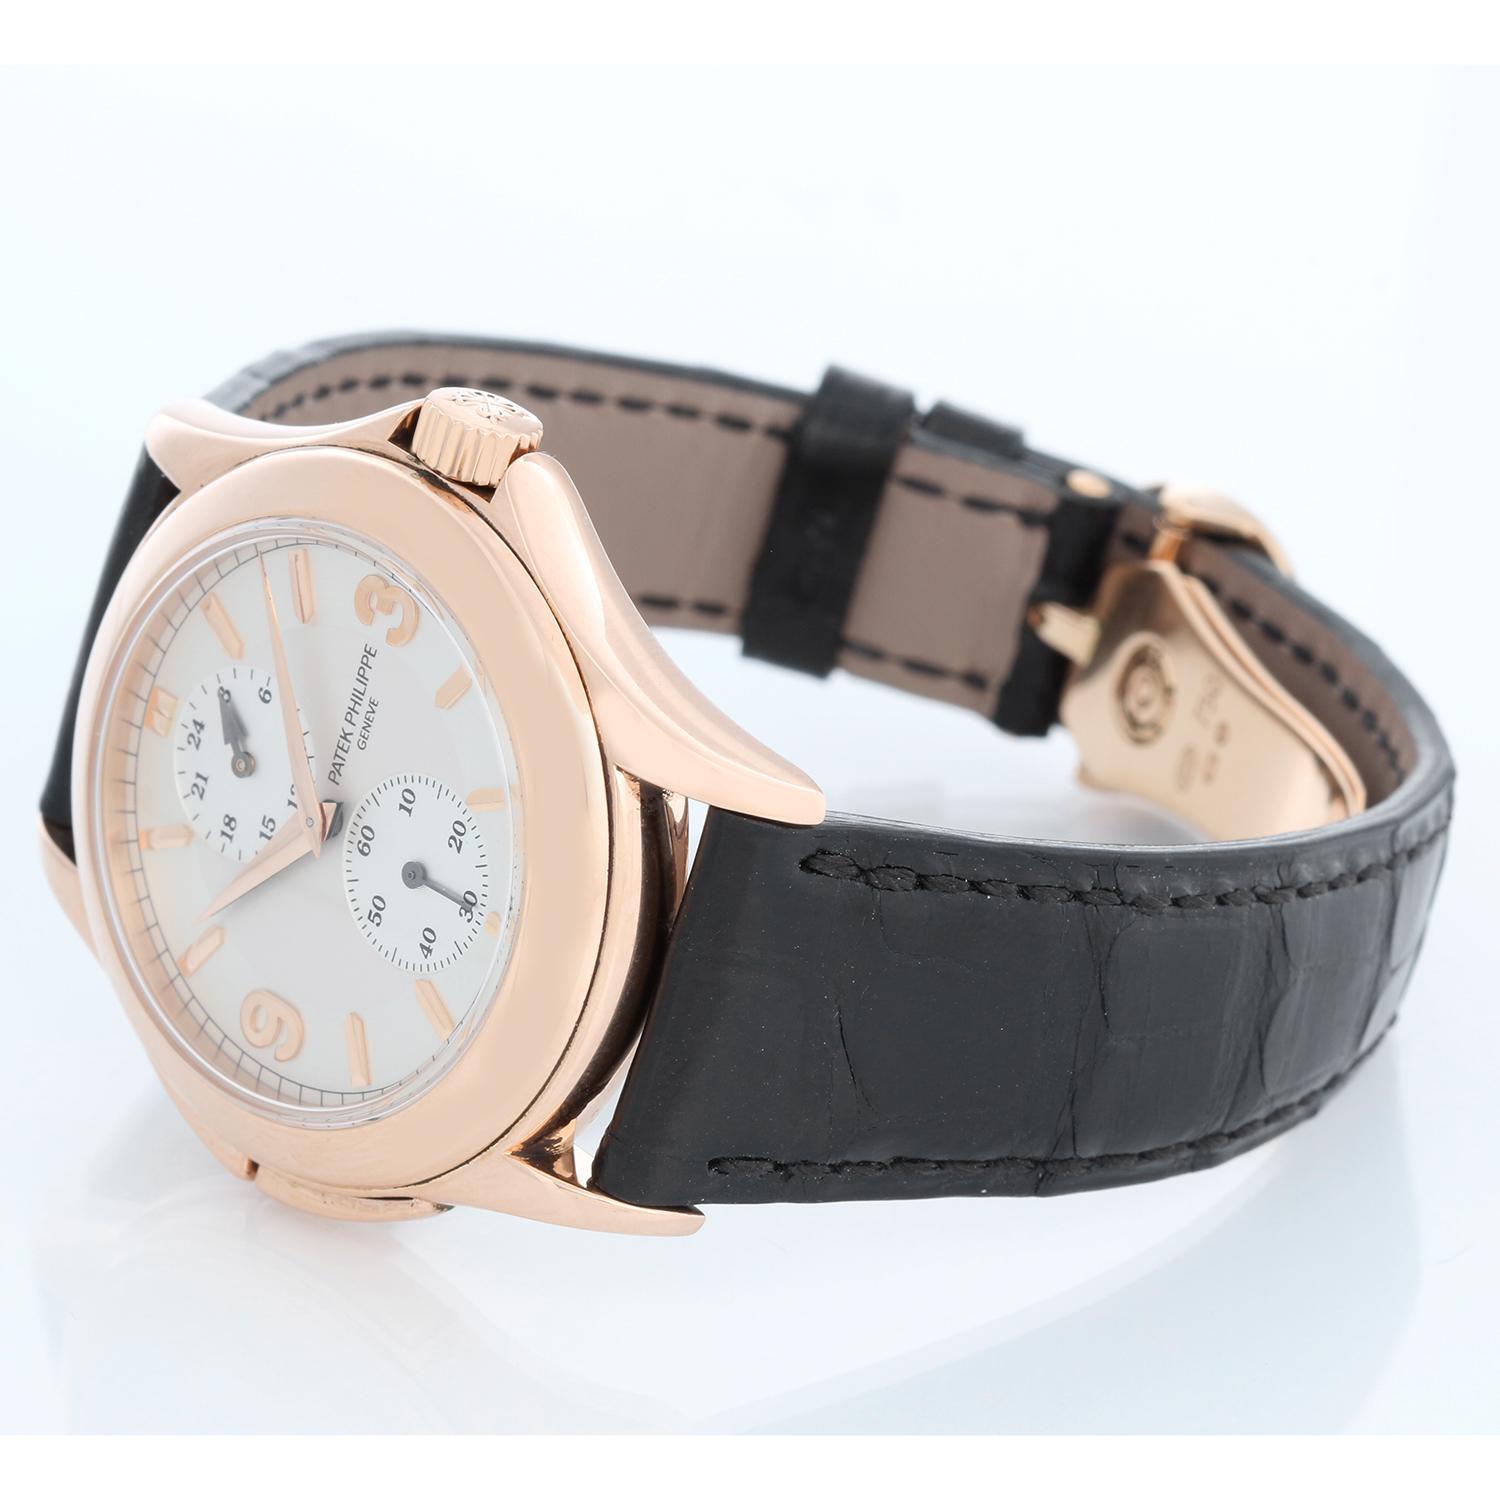 Collectible Patek Philippe Travel Time Men's 18k Rose Gold Watch 5134 R or 5134R - Manual winding; dual time. 18k rose gold case with exposition back (36mm diameter). Silver dial with rose gold raised numerals. Patek Philippe strap band; 18k rose 